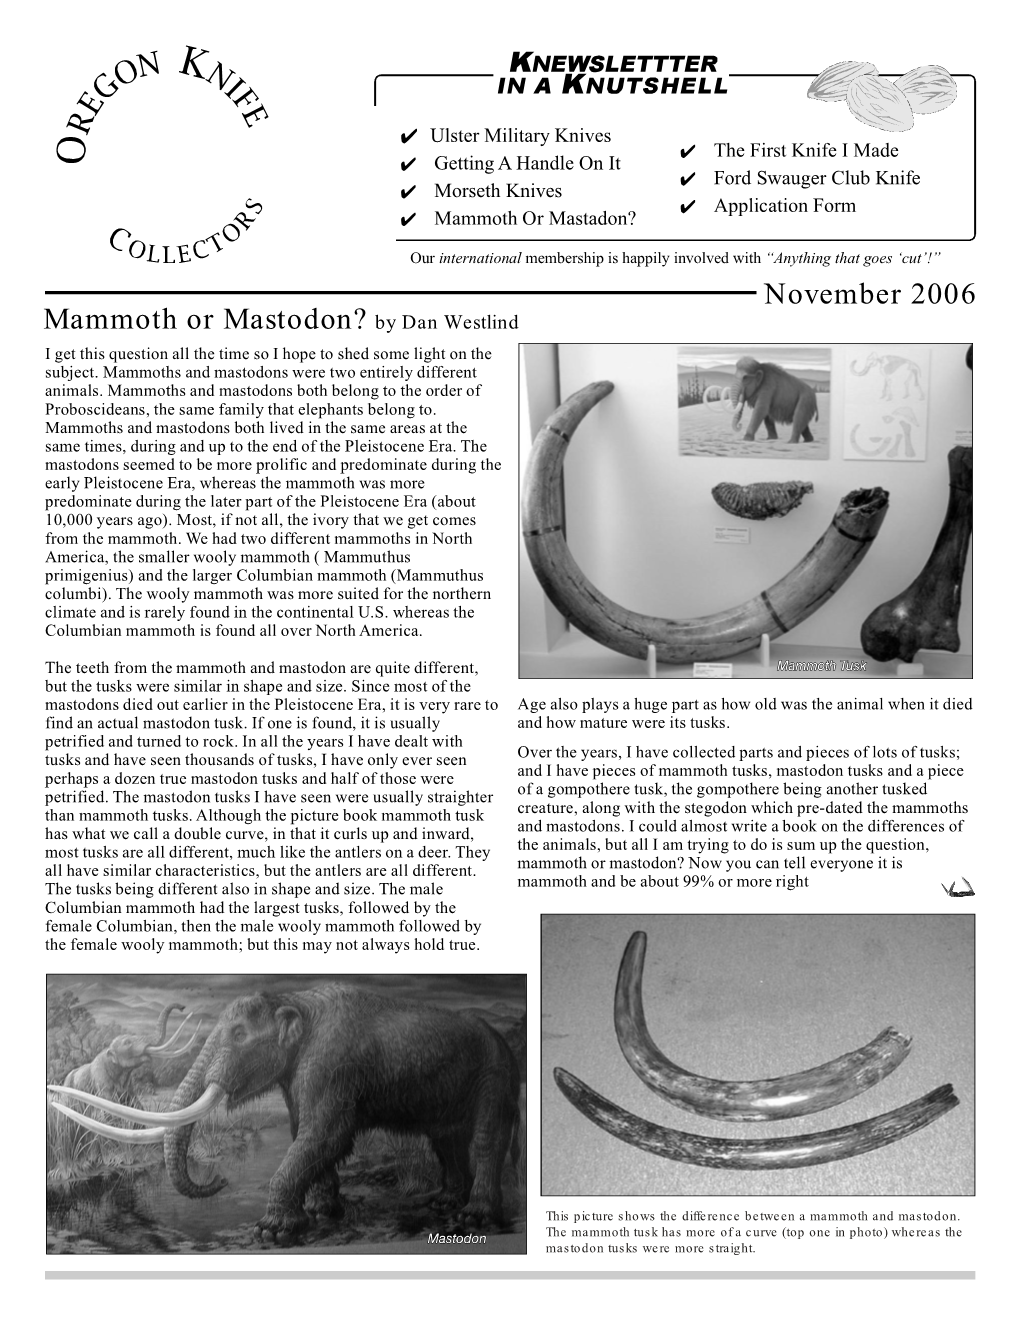 November 2006 Mammoth Or Mastodon? by Dan Westlind I Get This Question All the Time So I Hope to Shed Some Light on the Subject